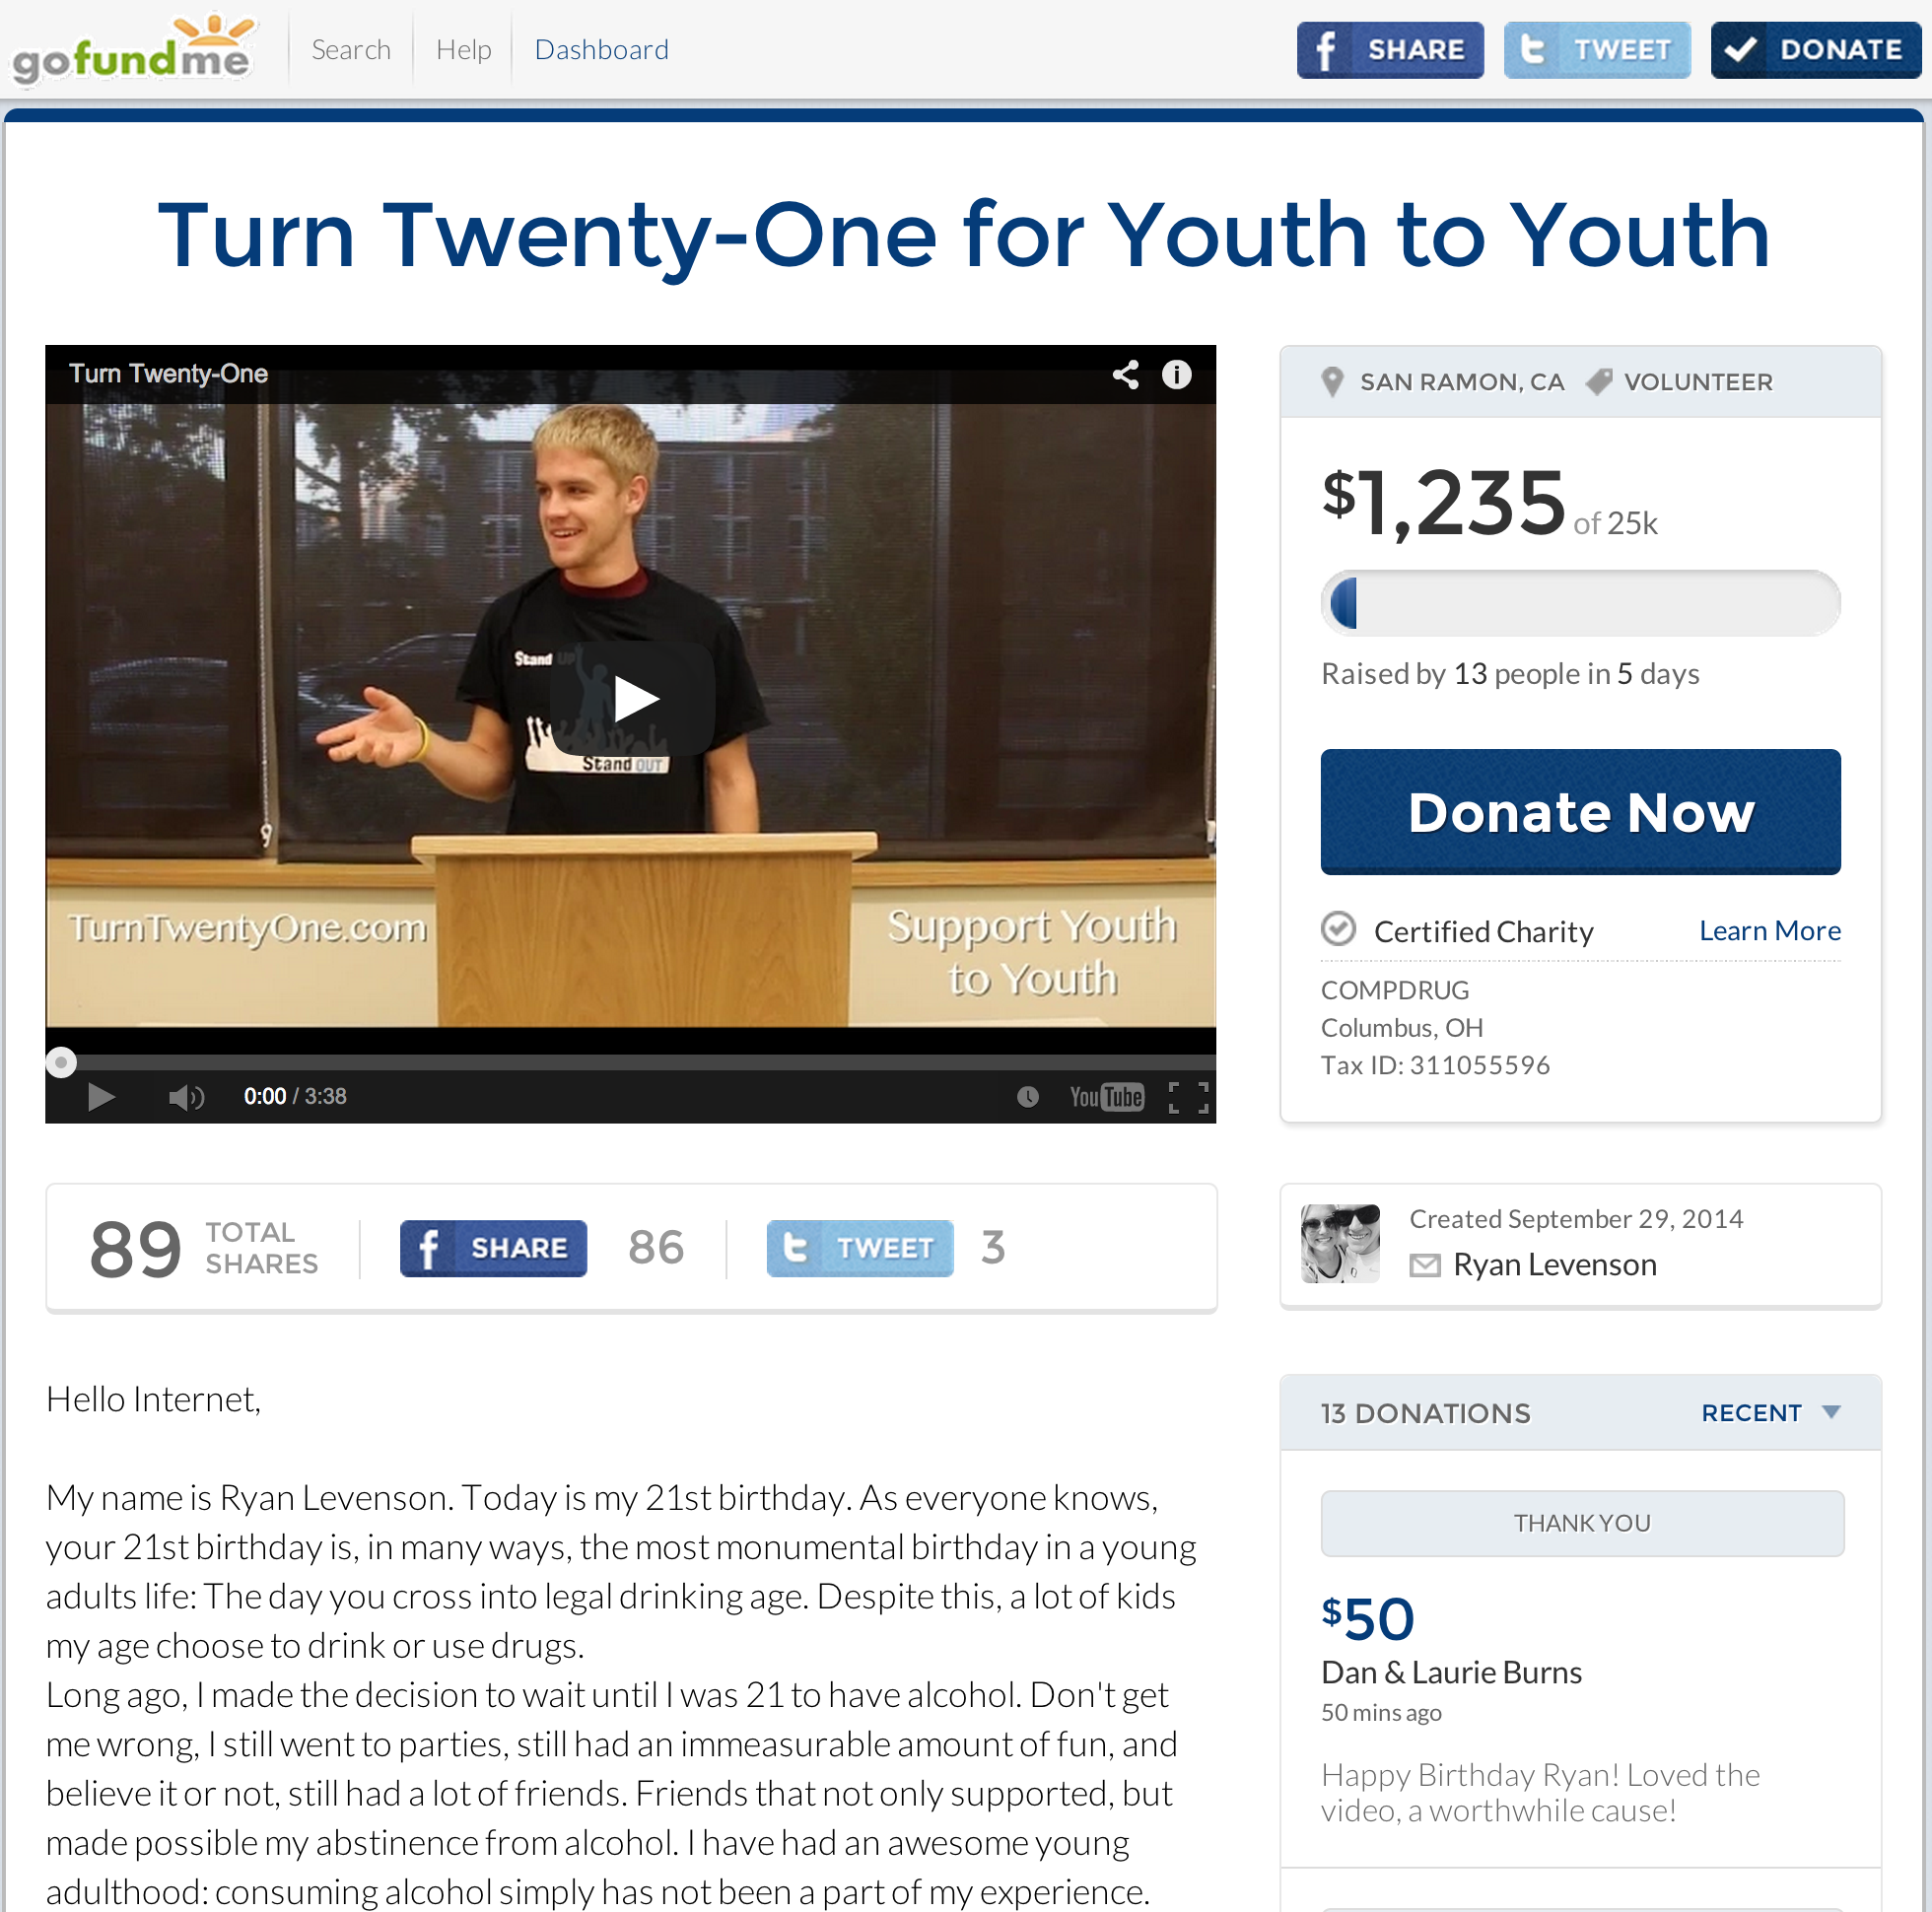 Support Youth to Youth on GoFundMe.com